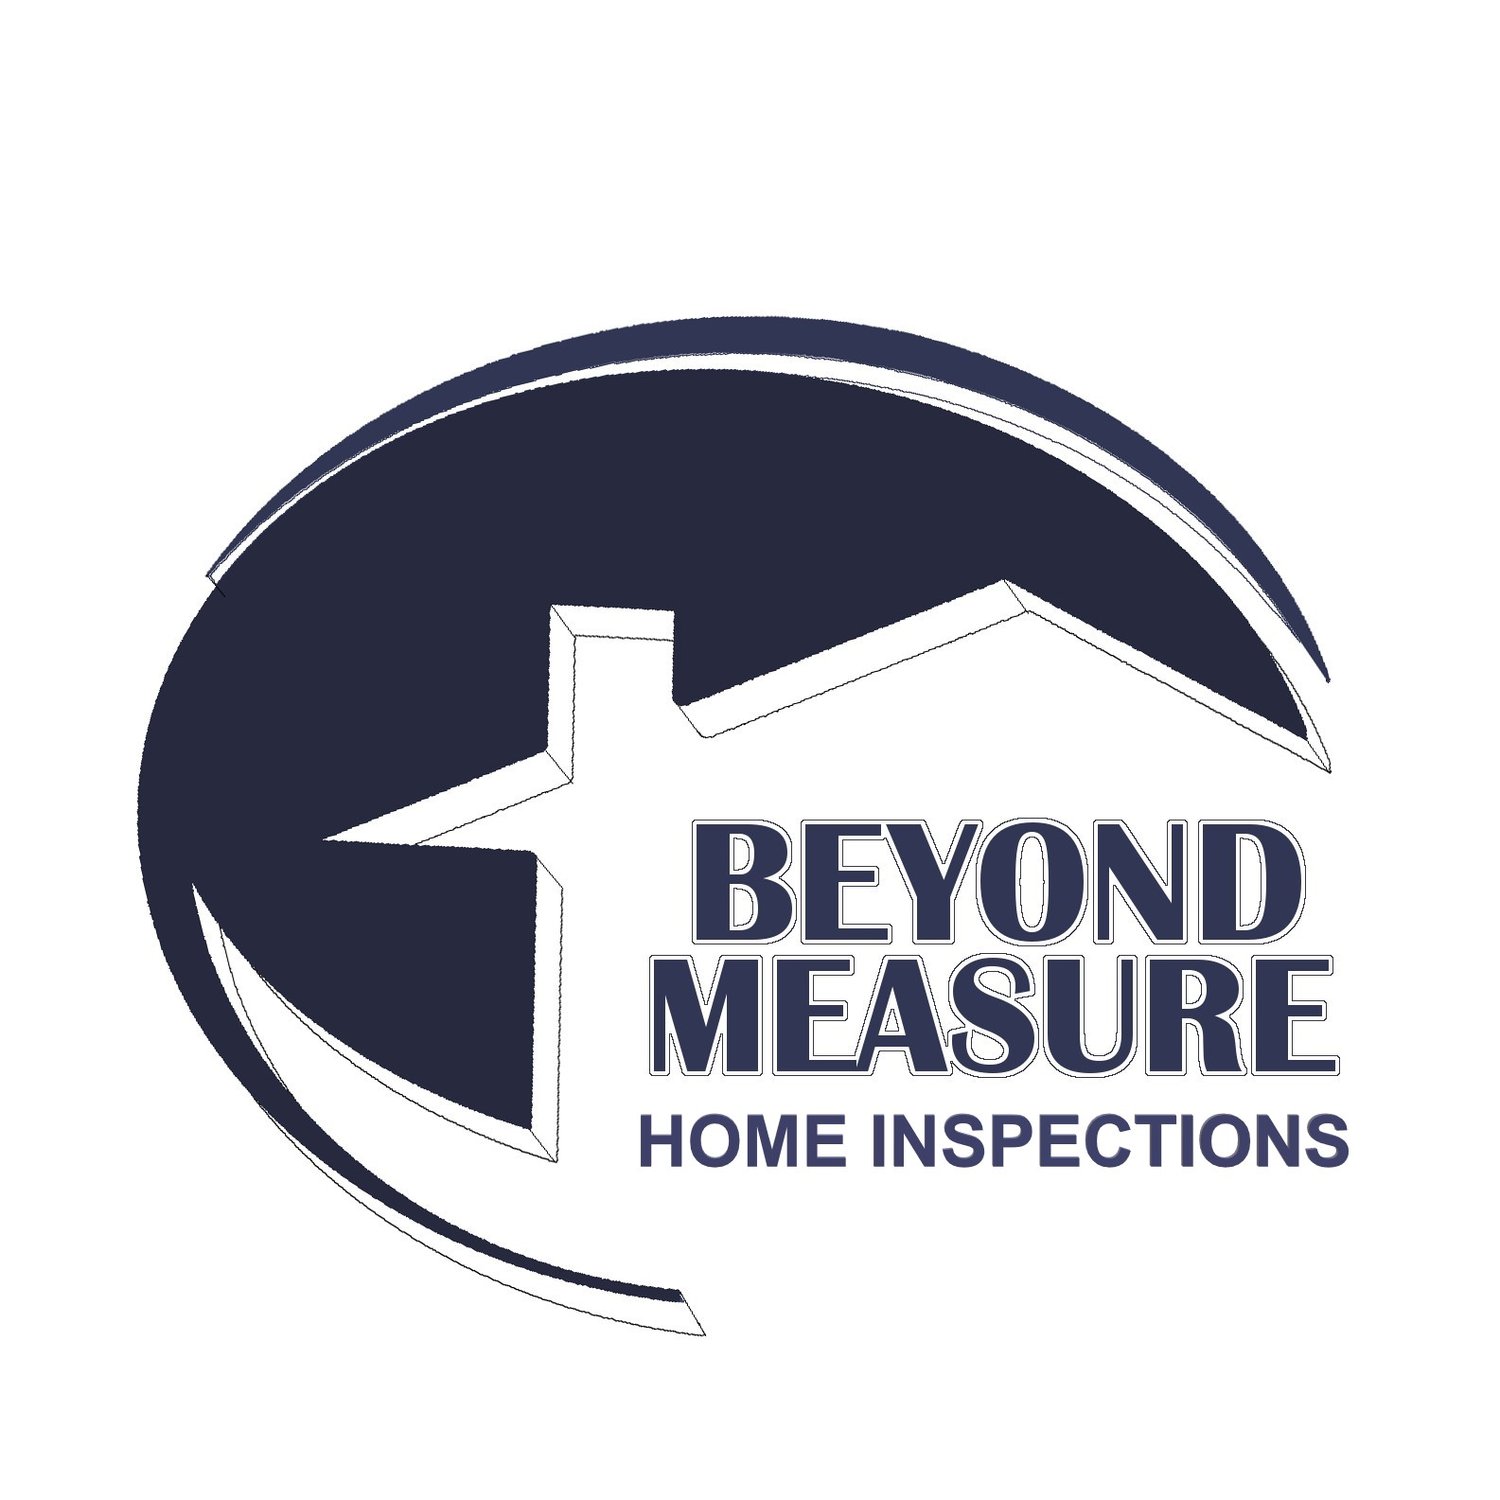 Beyond Measure Home Inspections